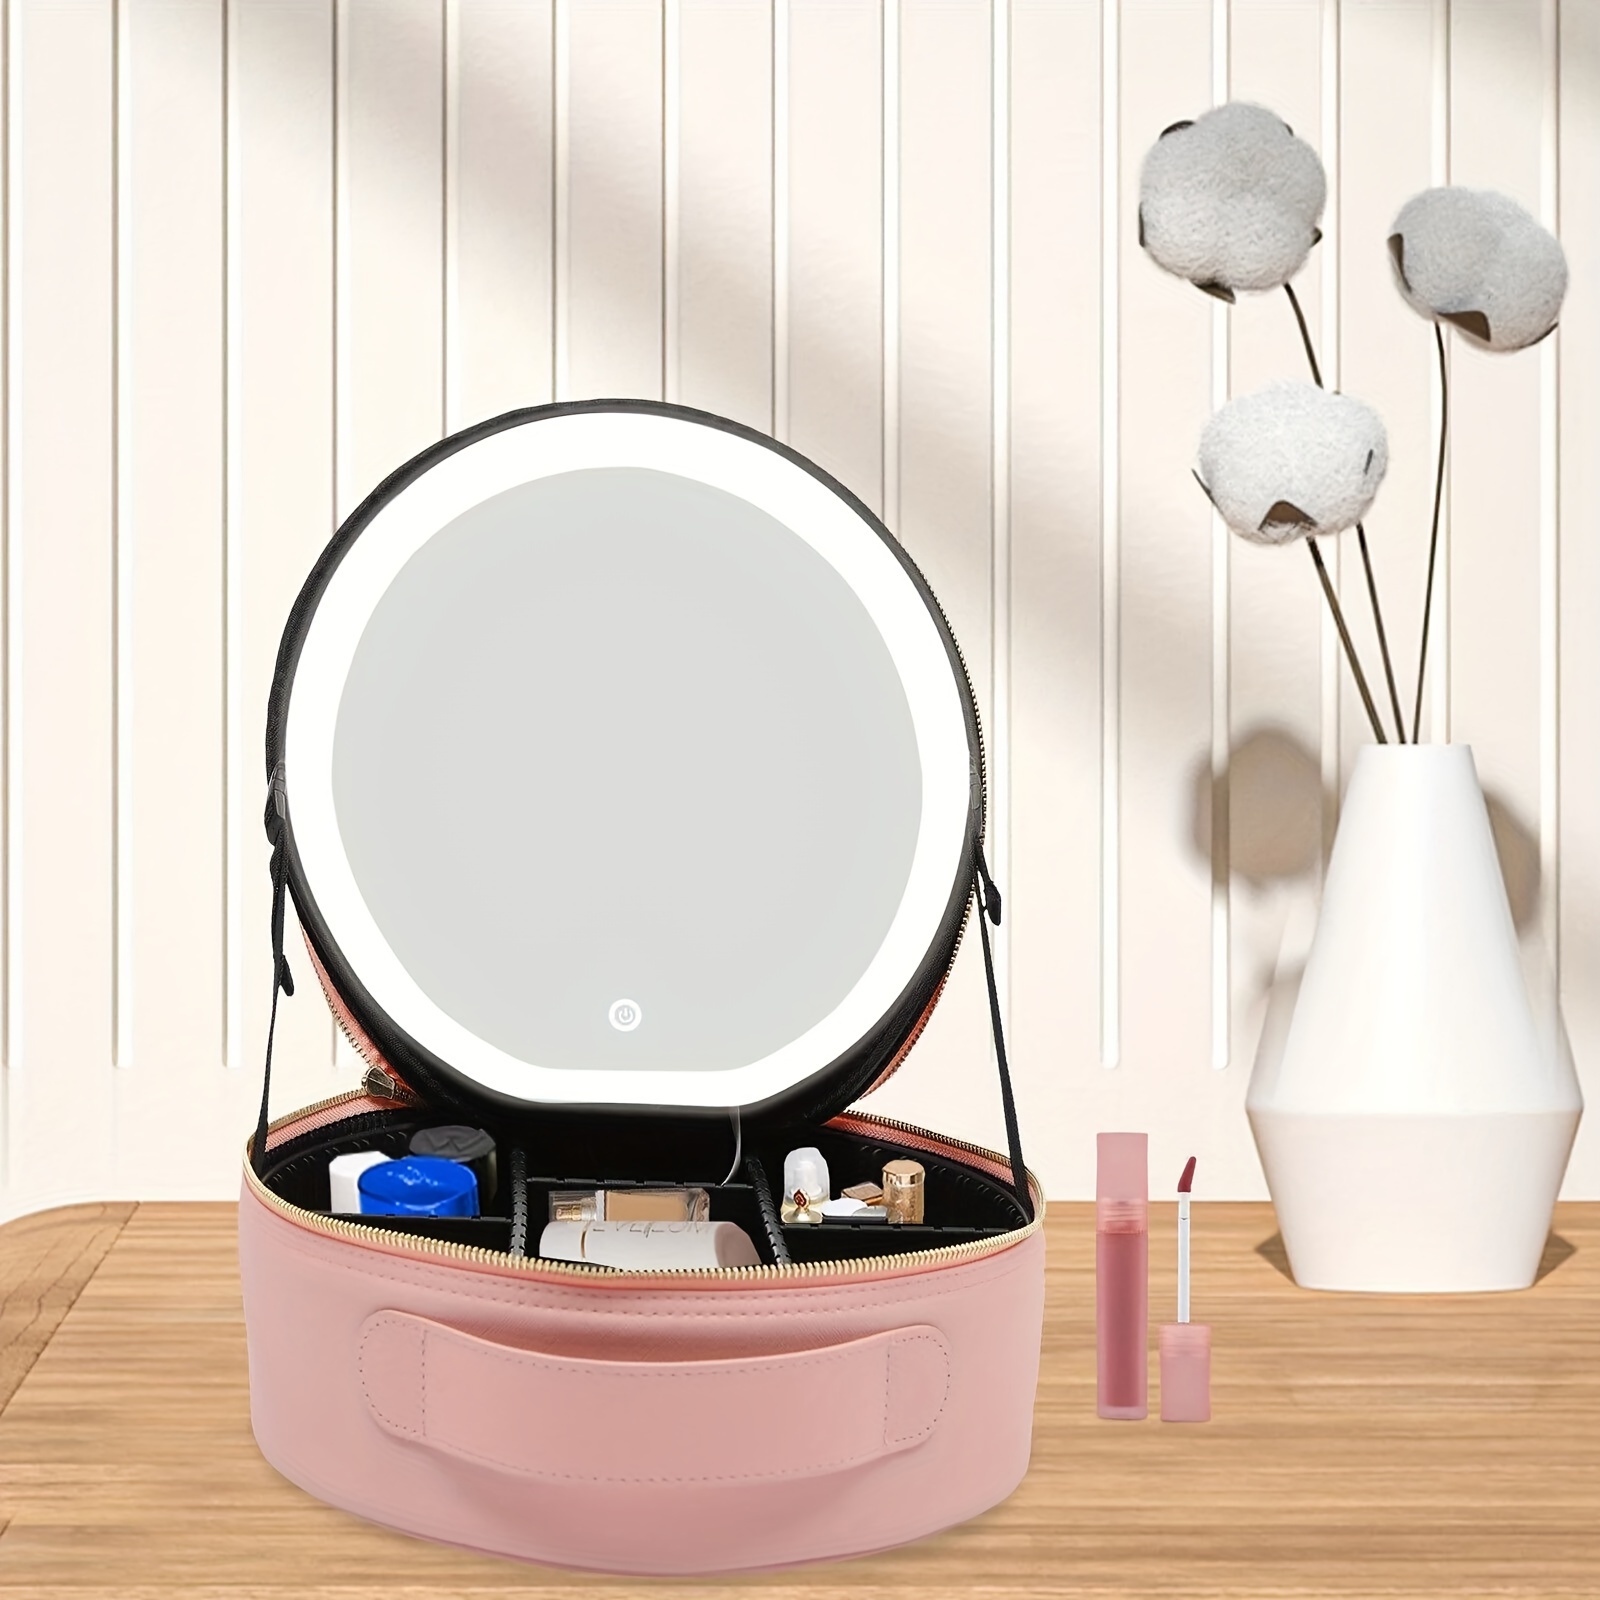 

Makeup Bag Cosmetic Case Round Cosmetic Case Portable Travel Makeup Train Case , Cosmetic Case With Mirror With Light, Adjustable Dividers